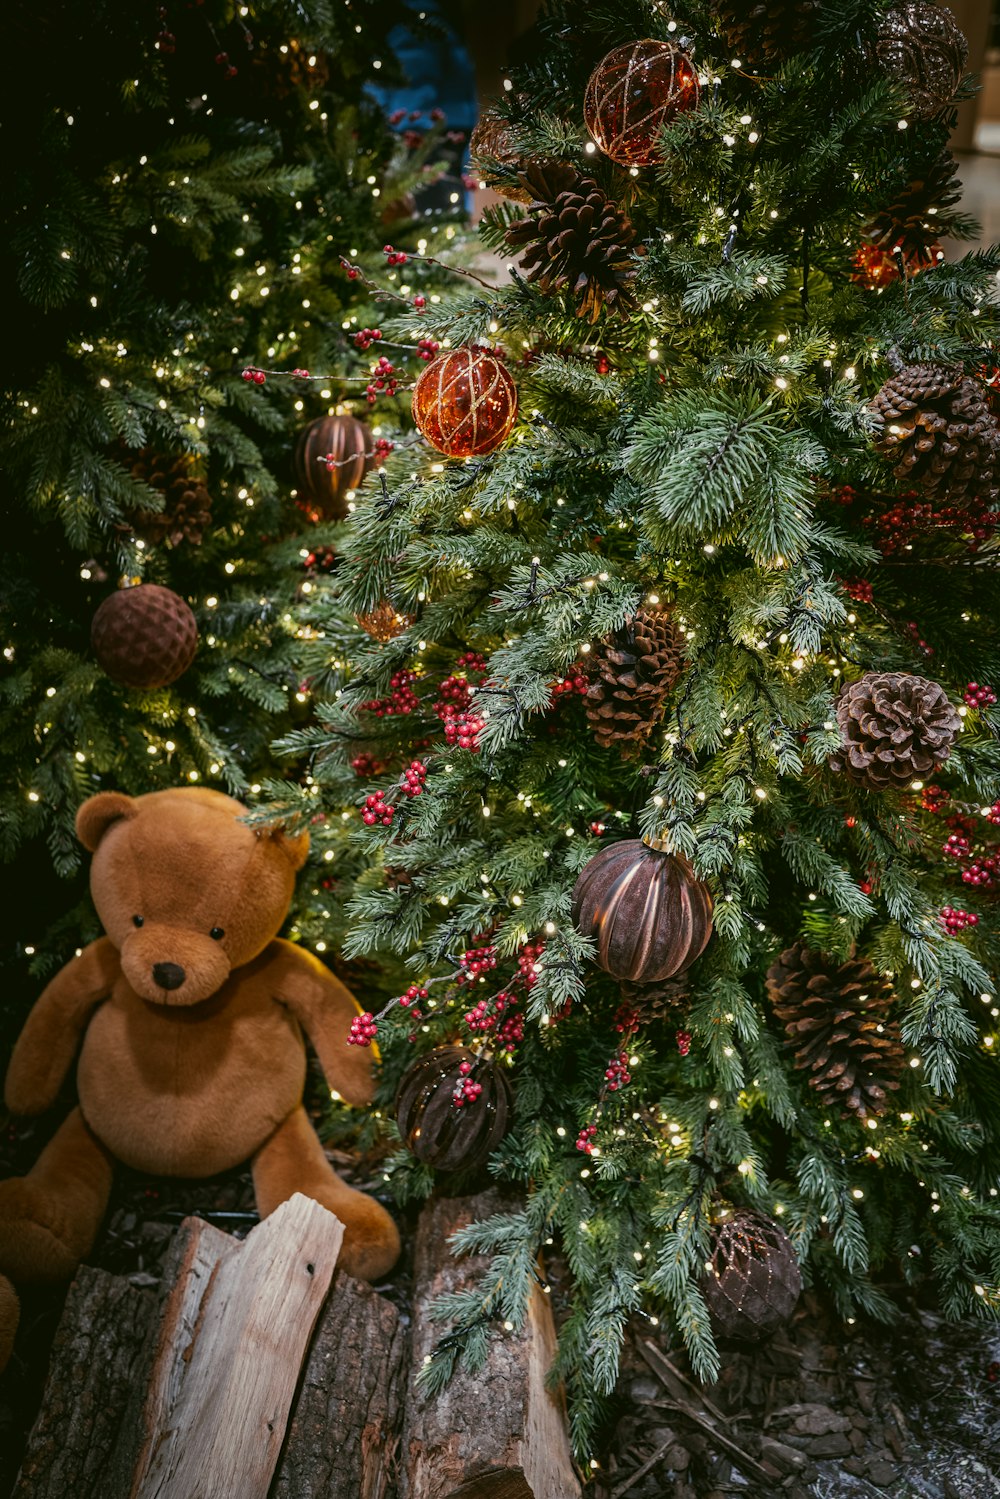 a teddy bear sitting in front of a christmas tree